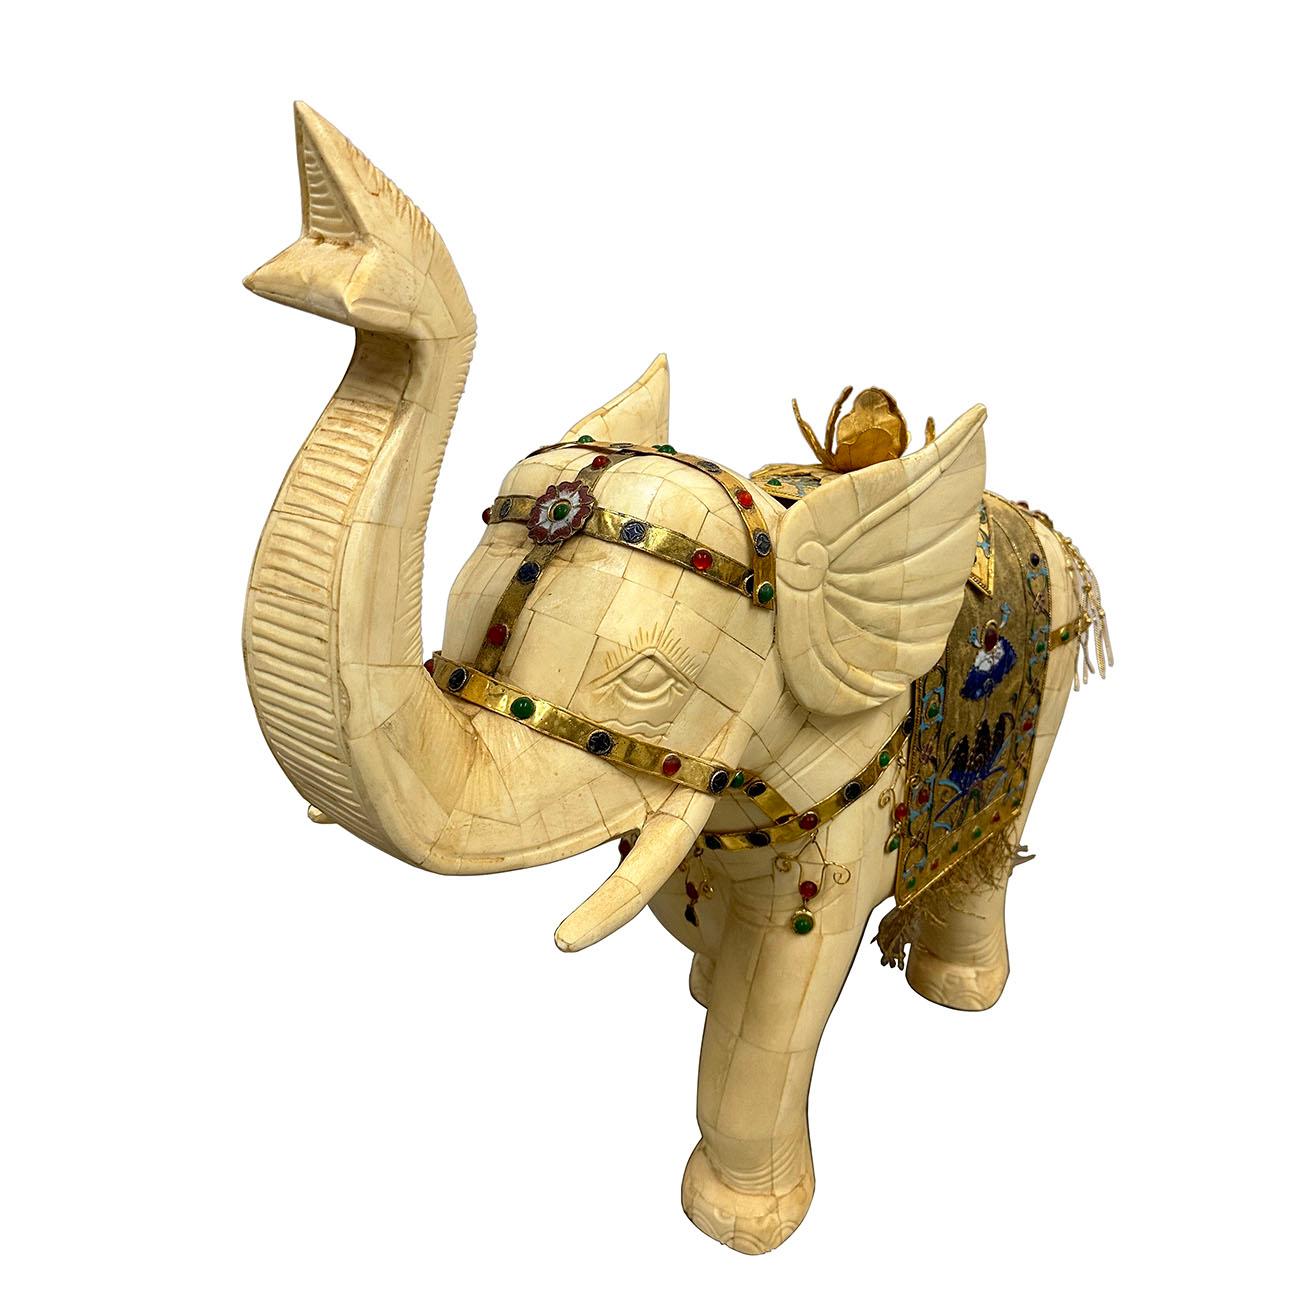 This magnificent antique Chinese bone carved elephant was 100% hand made and hand carved from OX bone. It has very detailed carving works on it. The rug on the elephant back was made from copper thread (AKA golden thread in Chinese) and decorated by